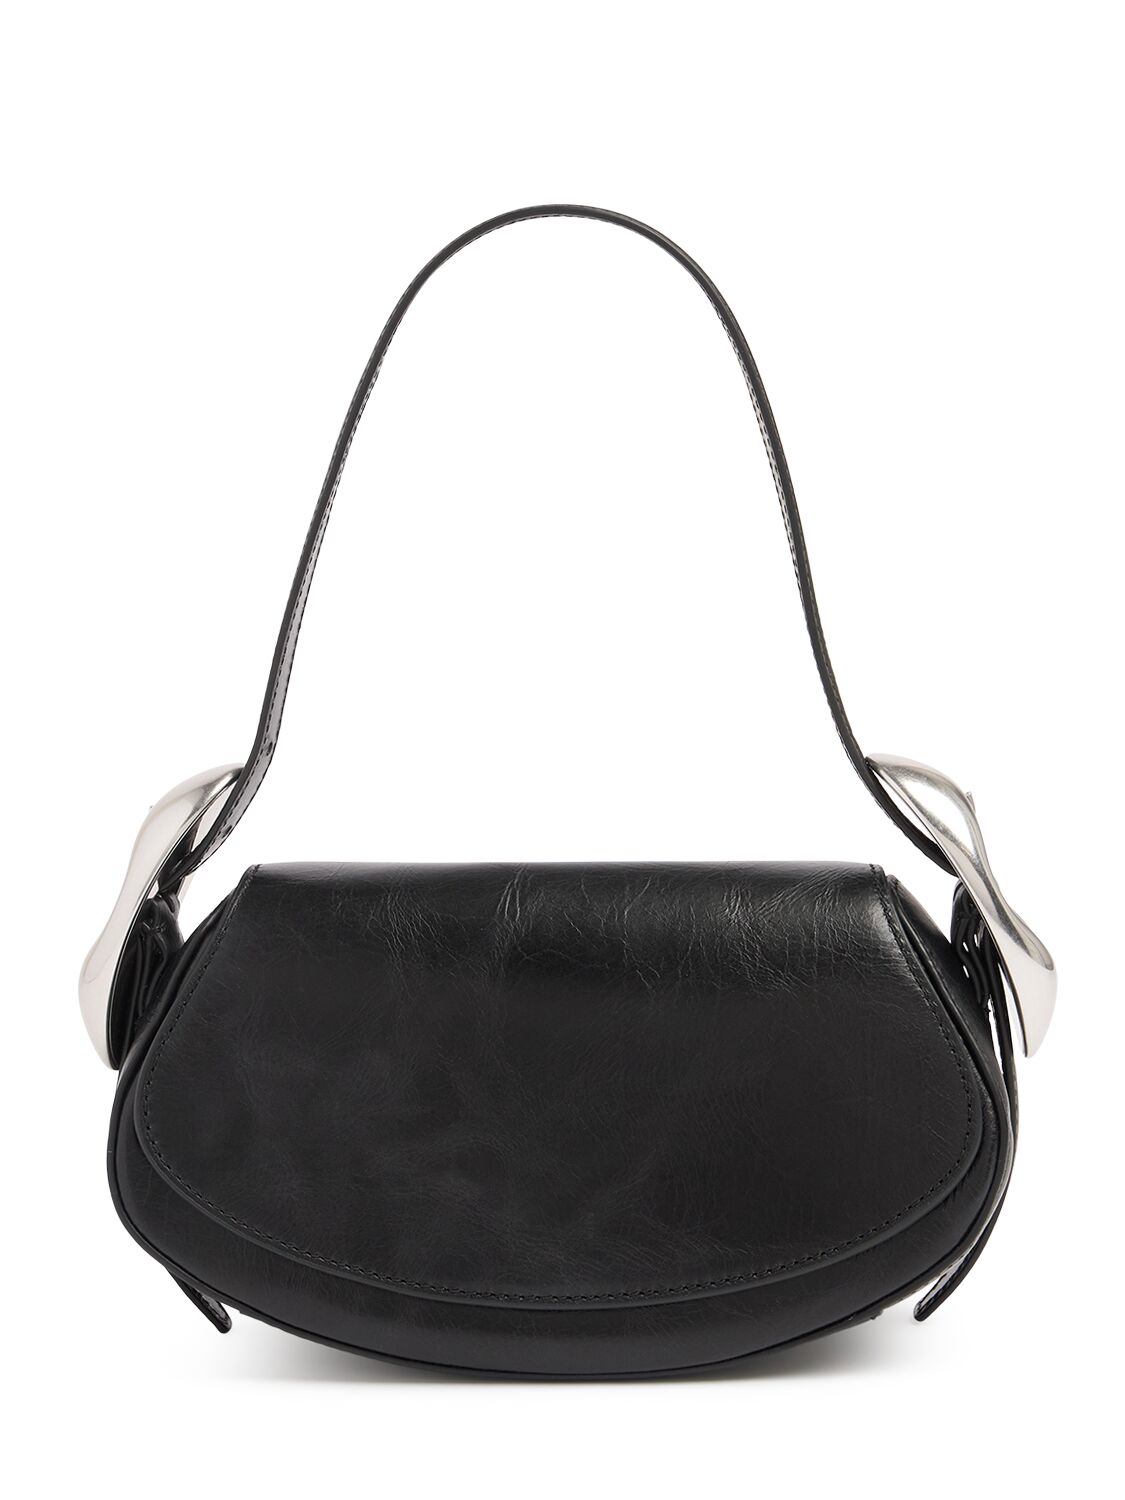 Small Orb Crackled Patent Leather Bag